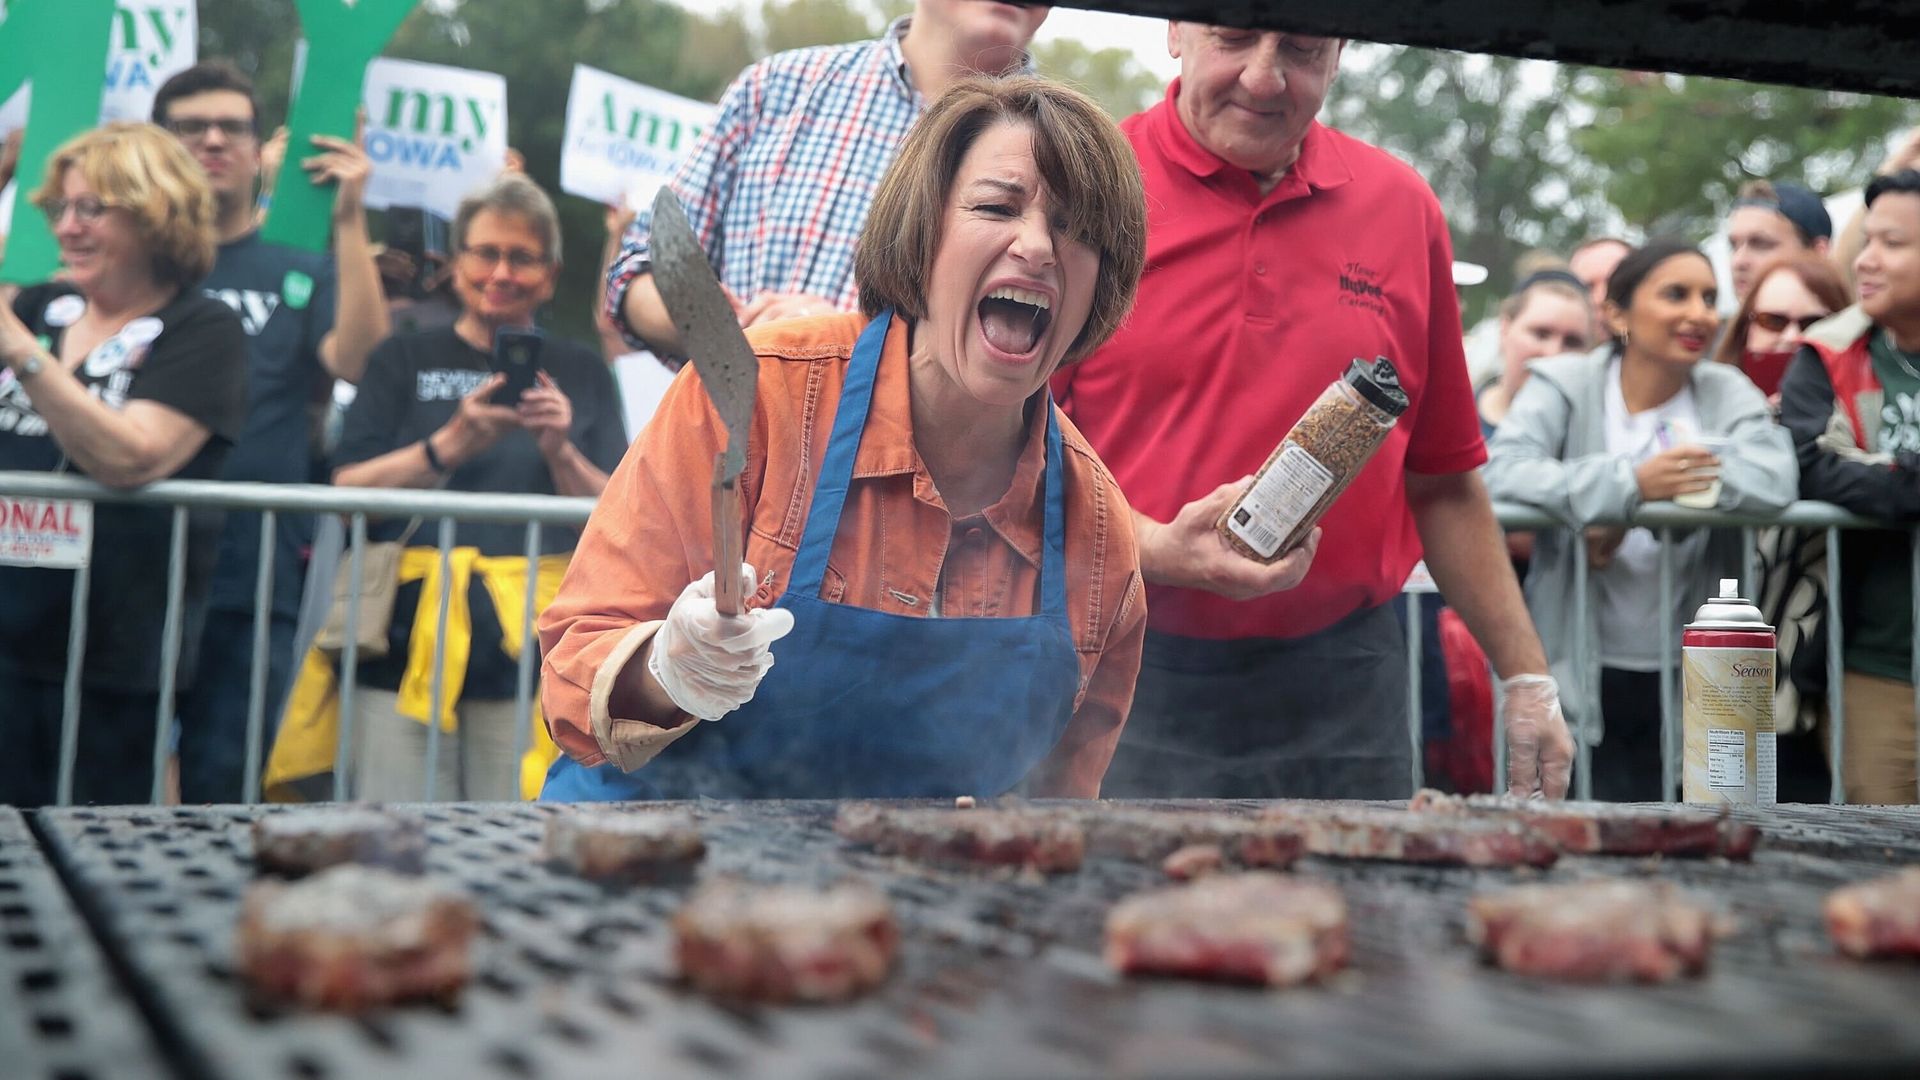 Women stands over grill cooking hamburgers at Steak Fry